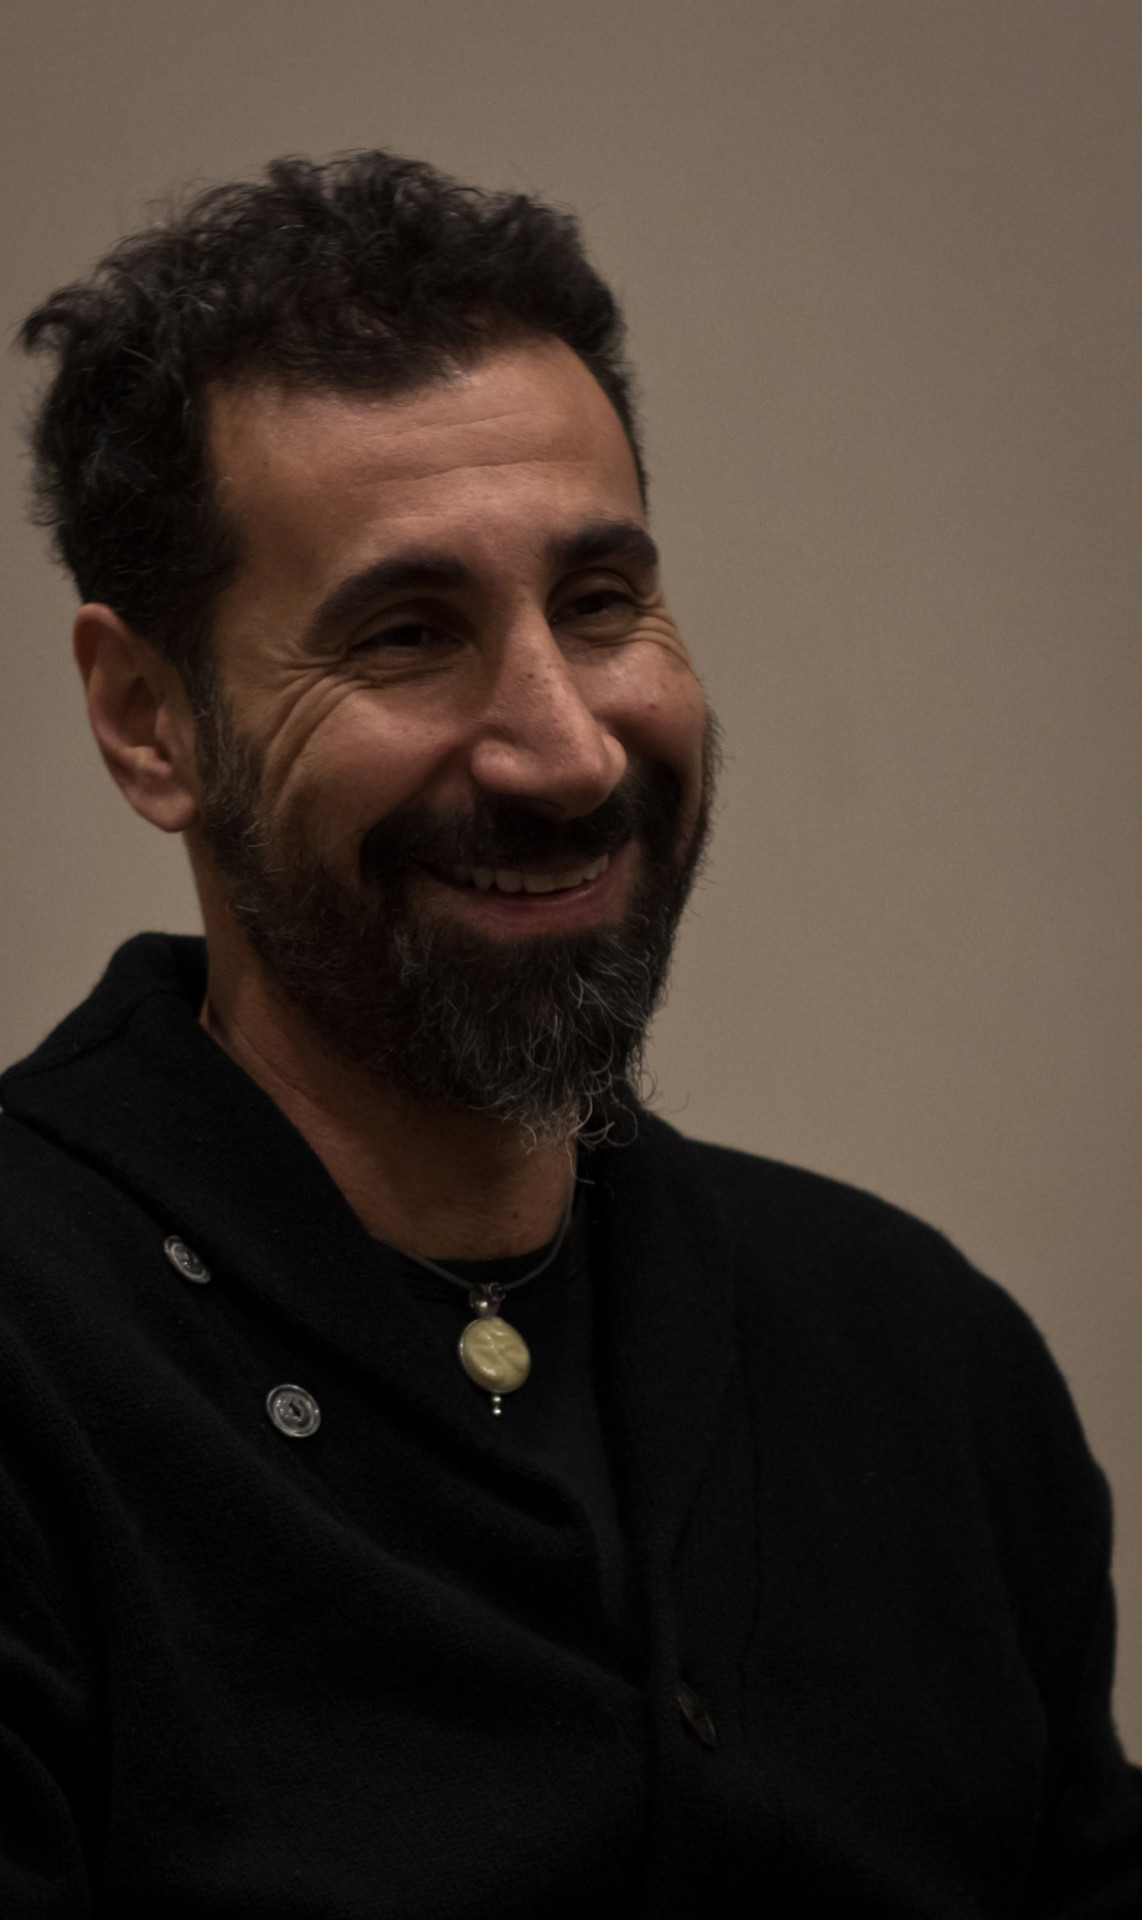 Through the Eyes of Music: An Interview with Serj Tankian